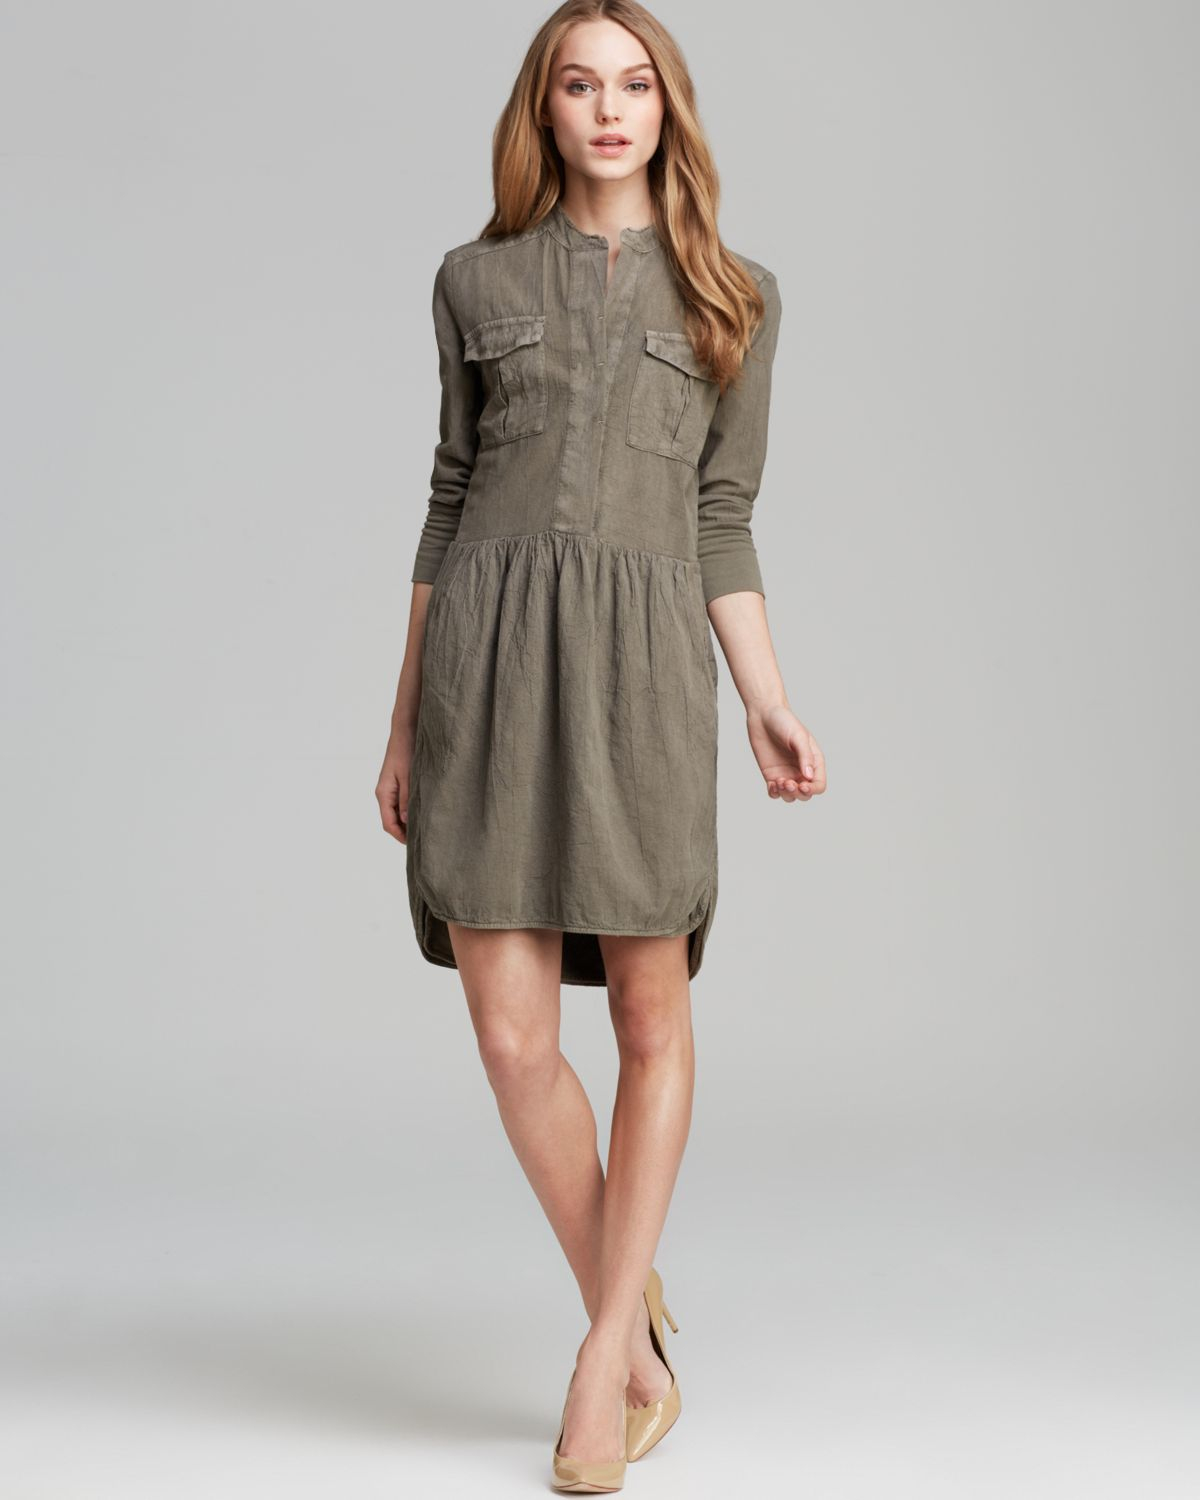 Lyst - James Perse Shirt Dress Tomboy in Stag in Gray